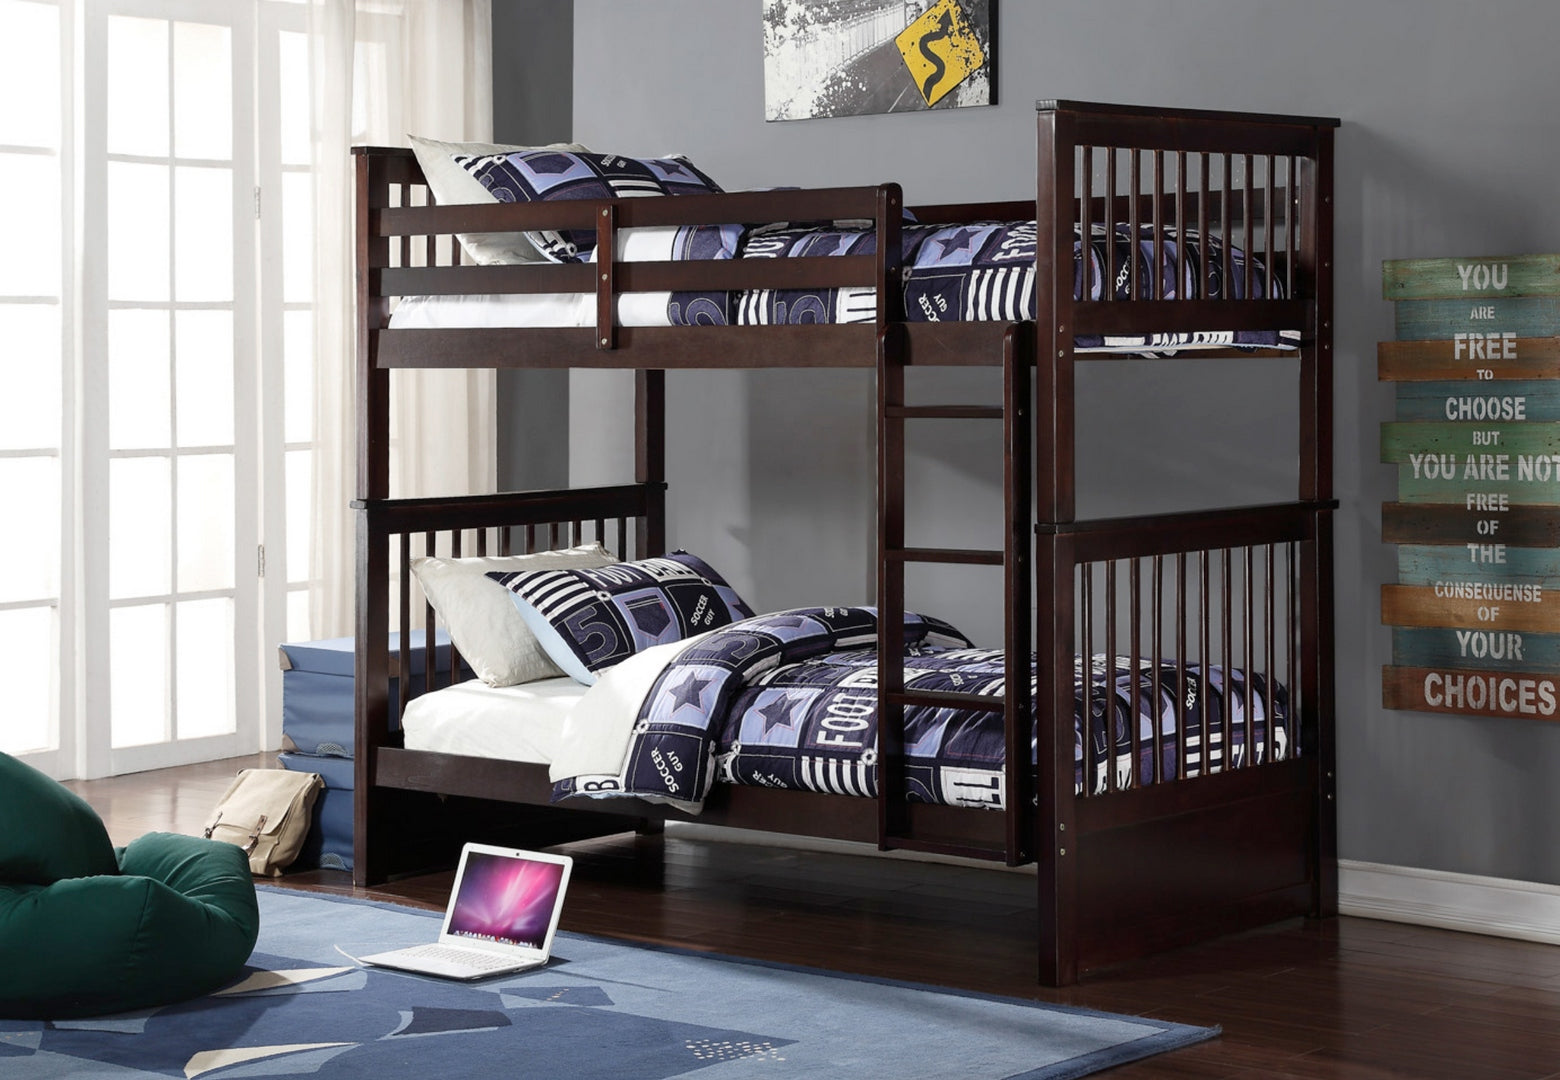 debra canter recommends co eds and bunk beds pic